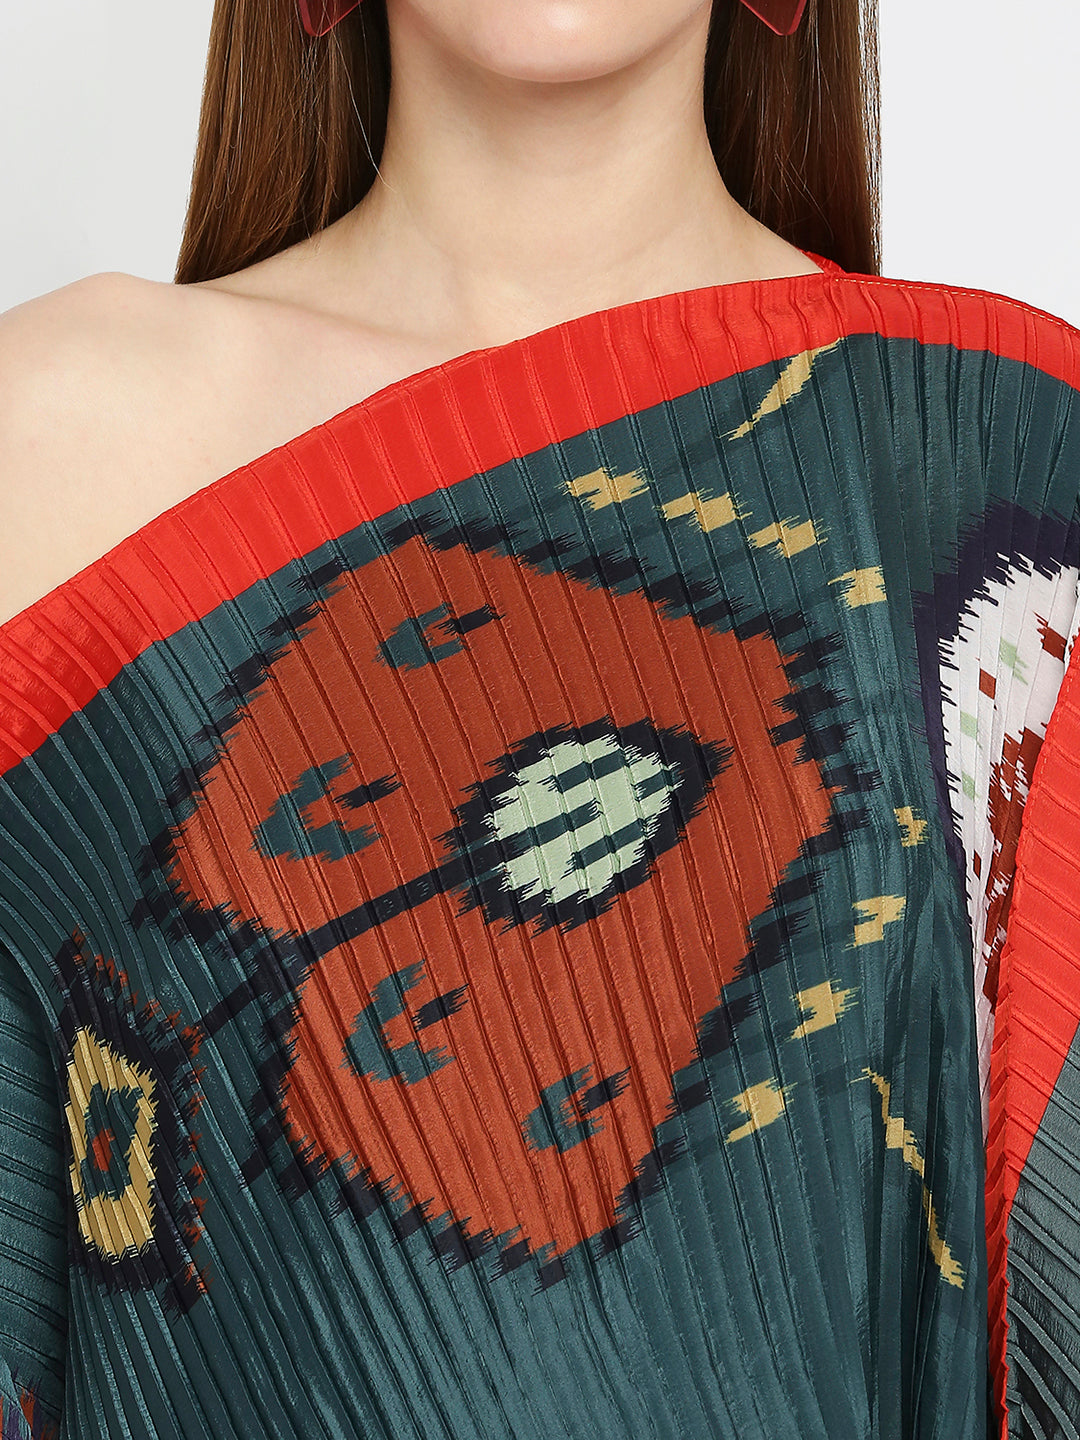 Green with Red Border Ikat Printed Off Shoulder Pleated Poncho